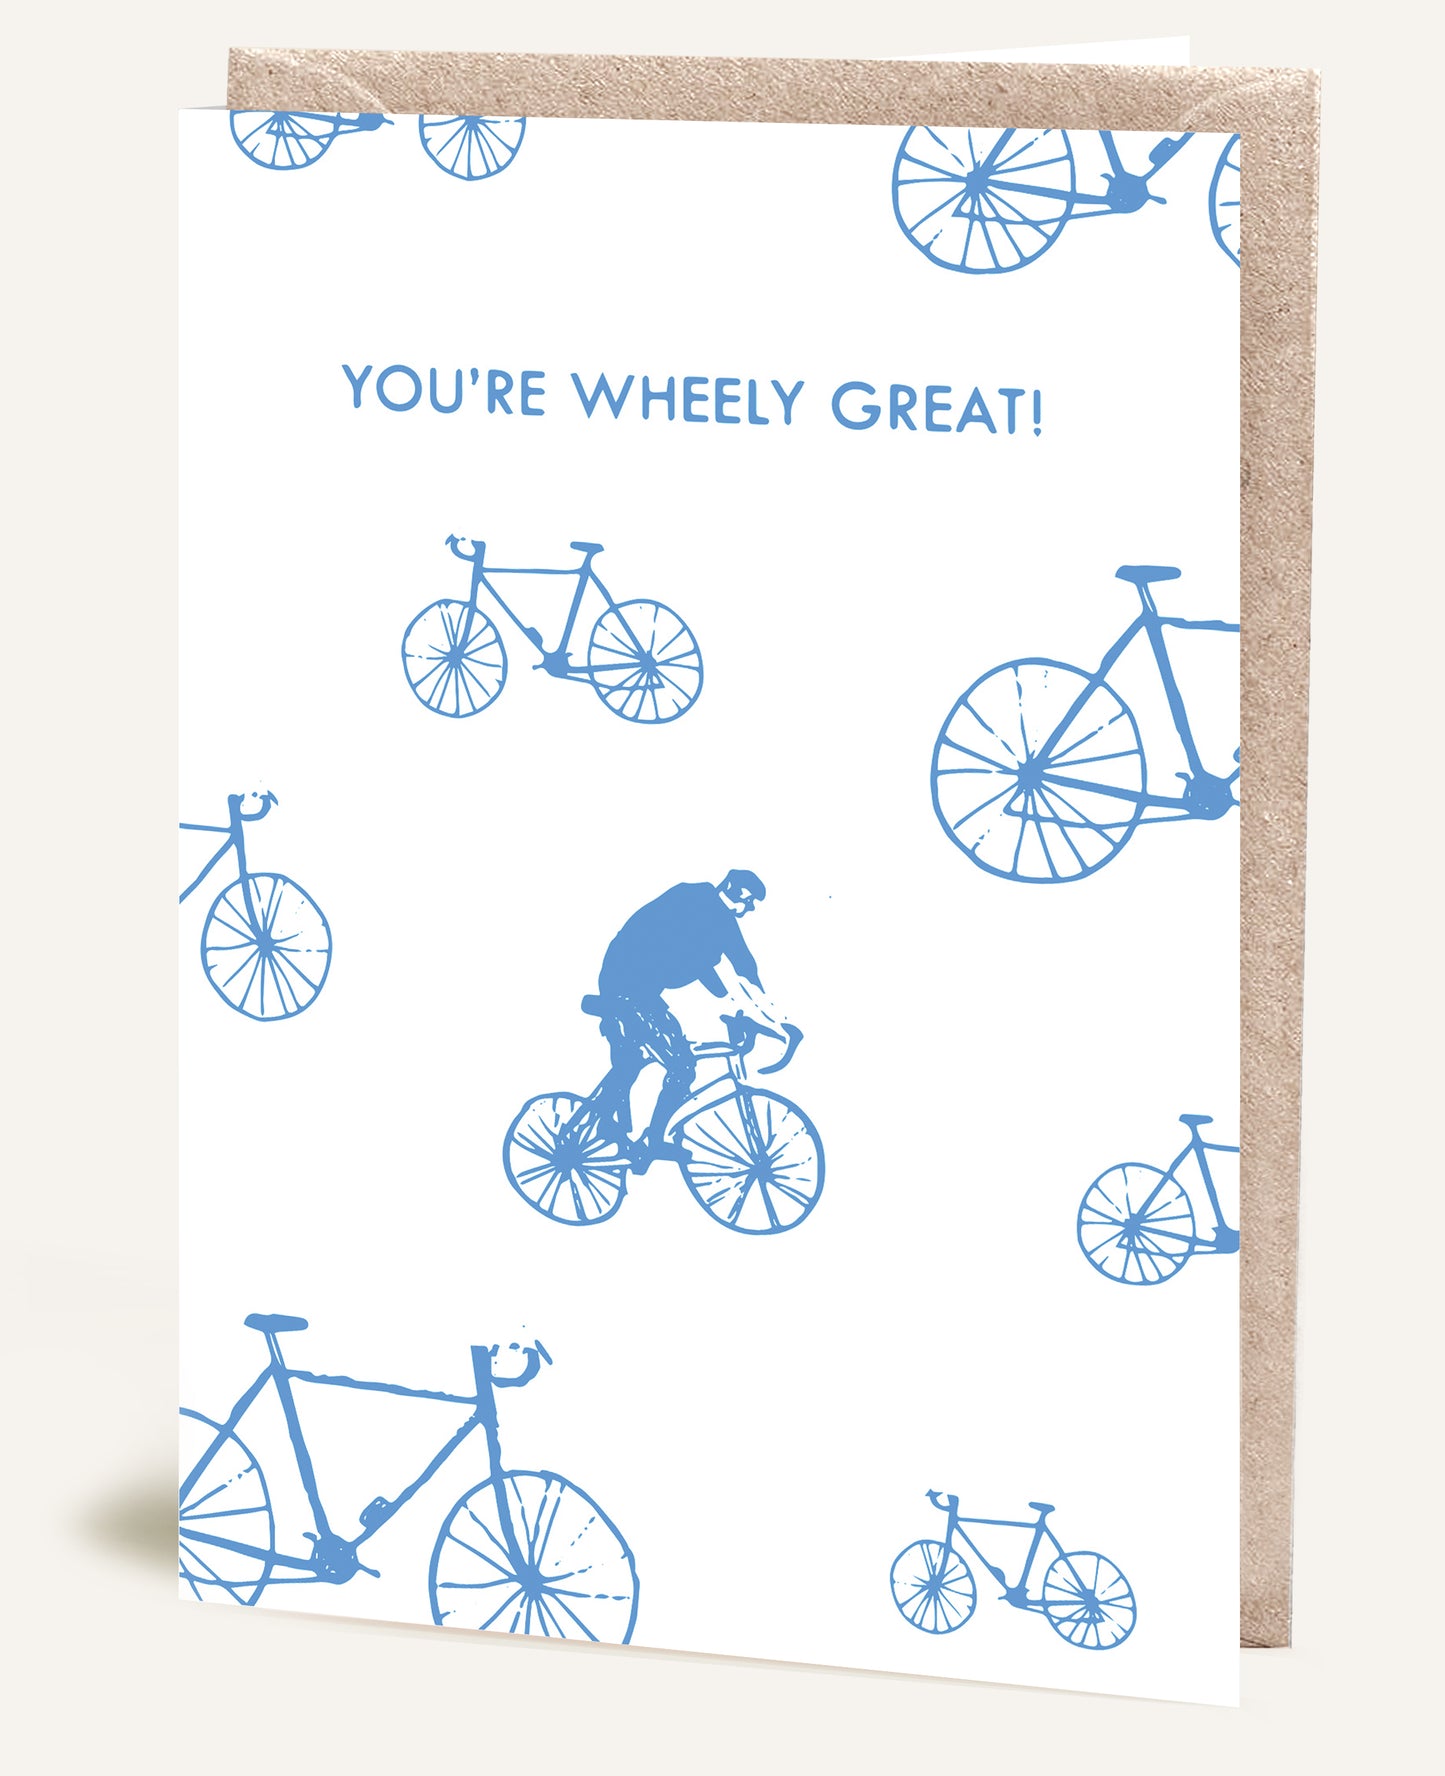 YOU'RE WHEELY GREAT